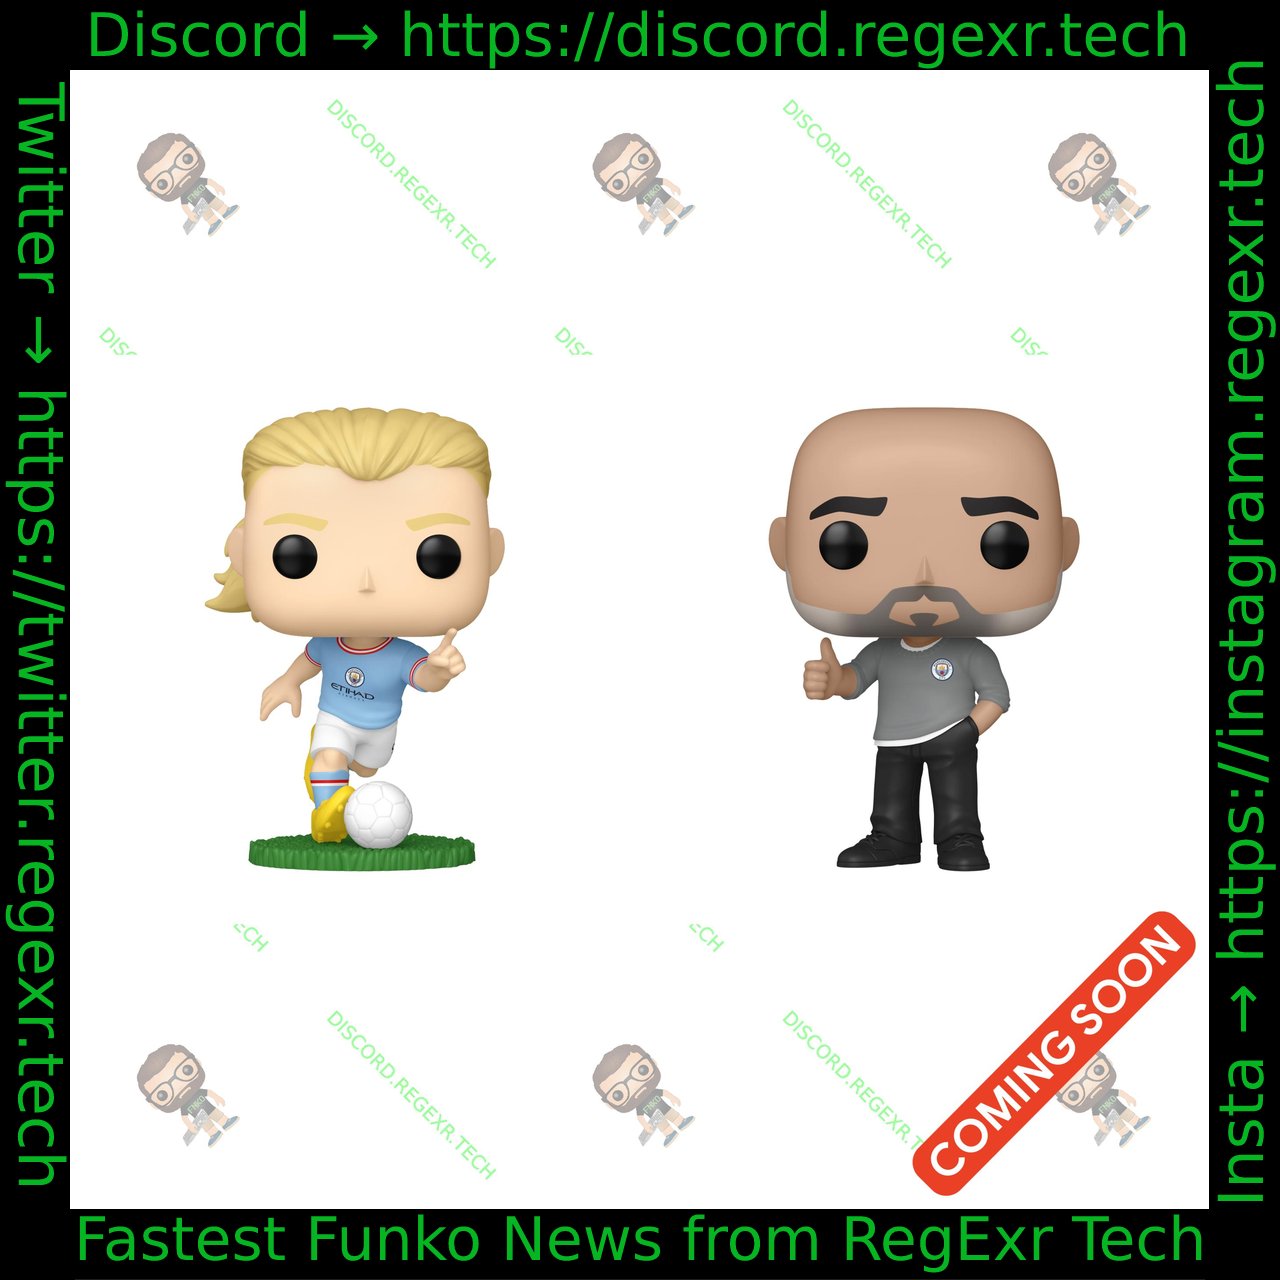 PopCommunity on X: Coming Soon: Manchester City Manchester City Pop!  Erling Haaland, Pep Guardiola PREORDER HERE:    / X